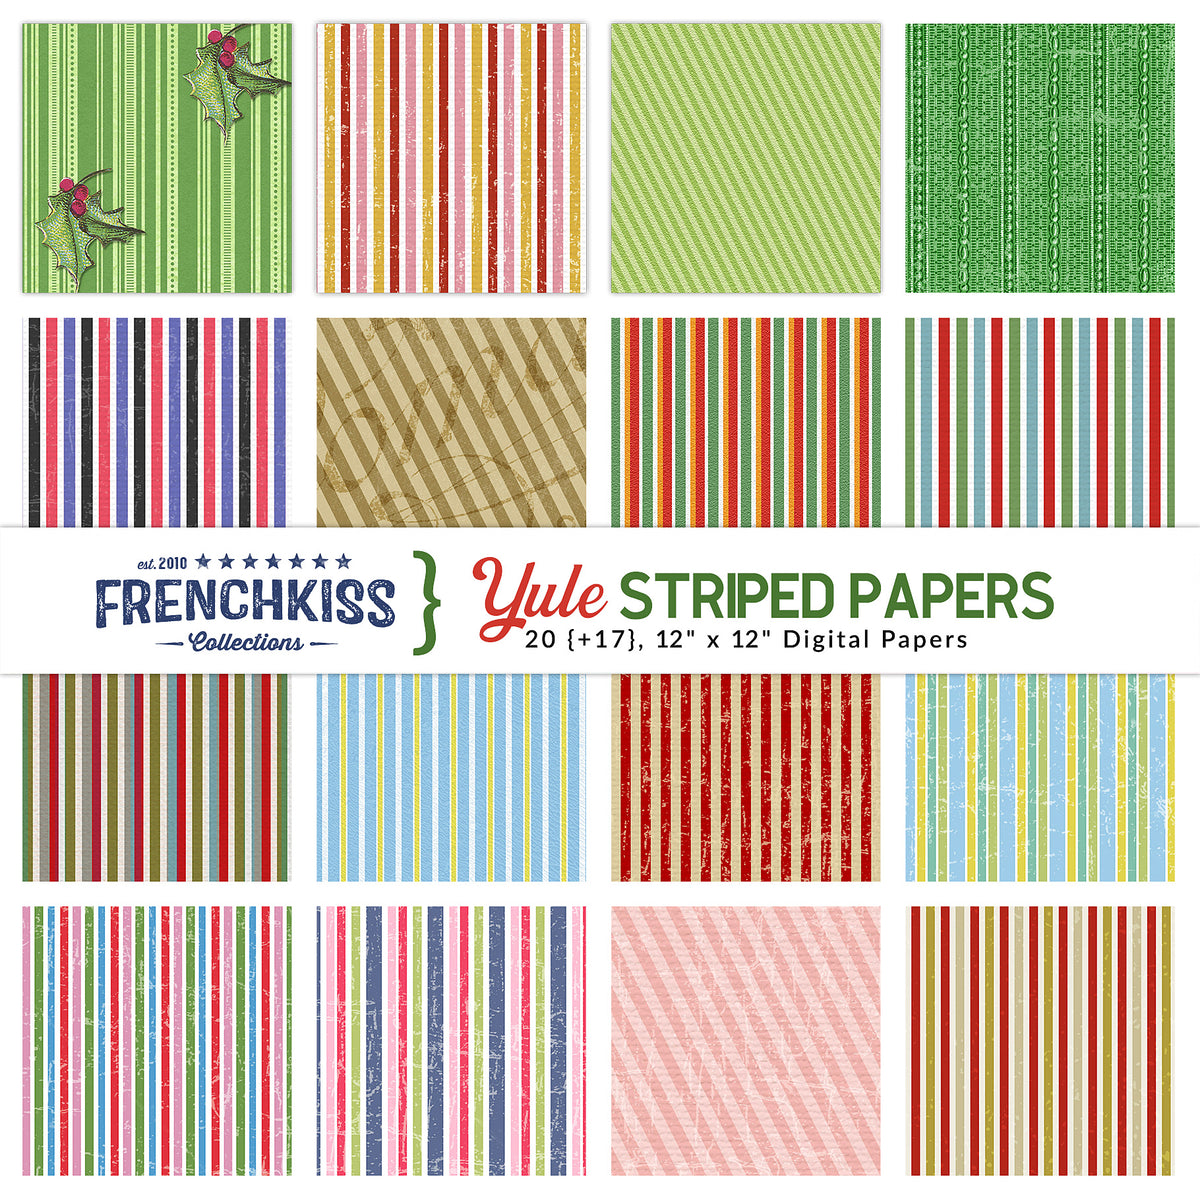 Yule Striped Digital Papers in Christmas colors but versatile enough for many usages.